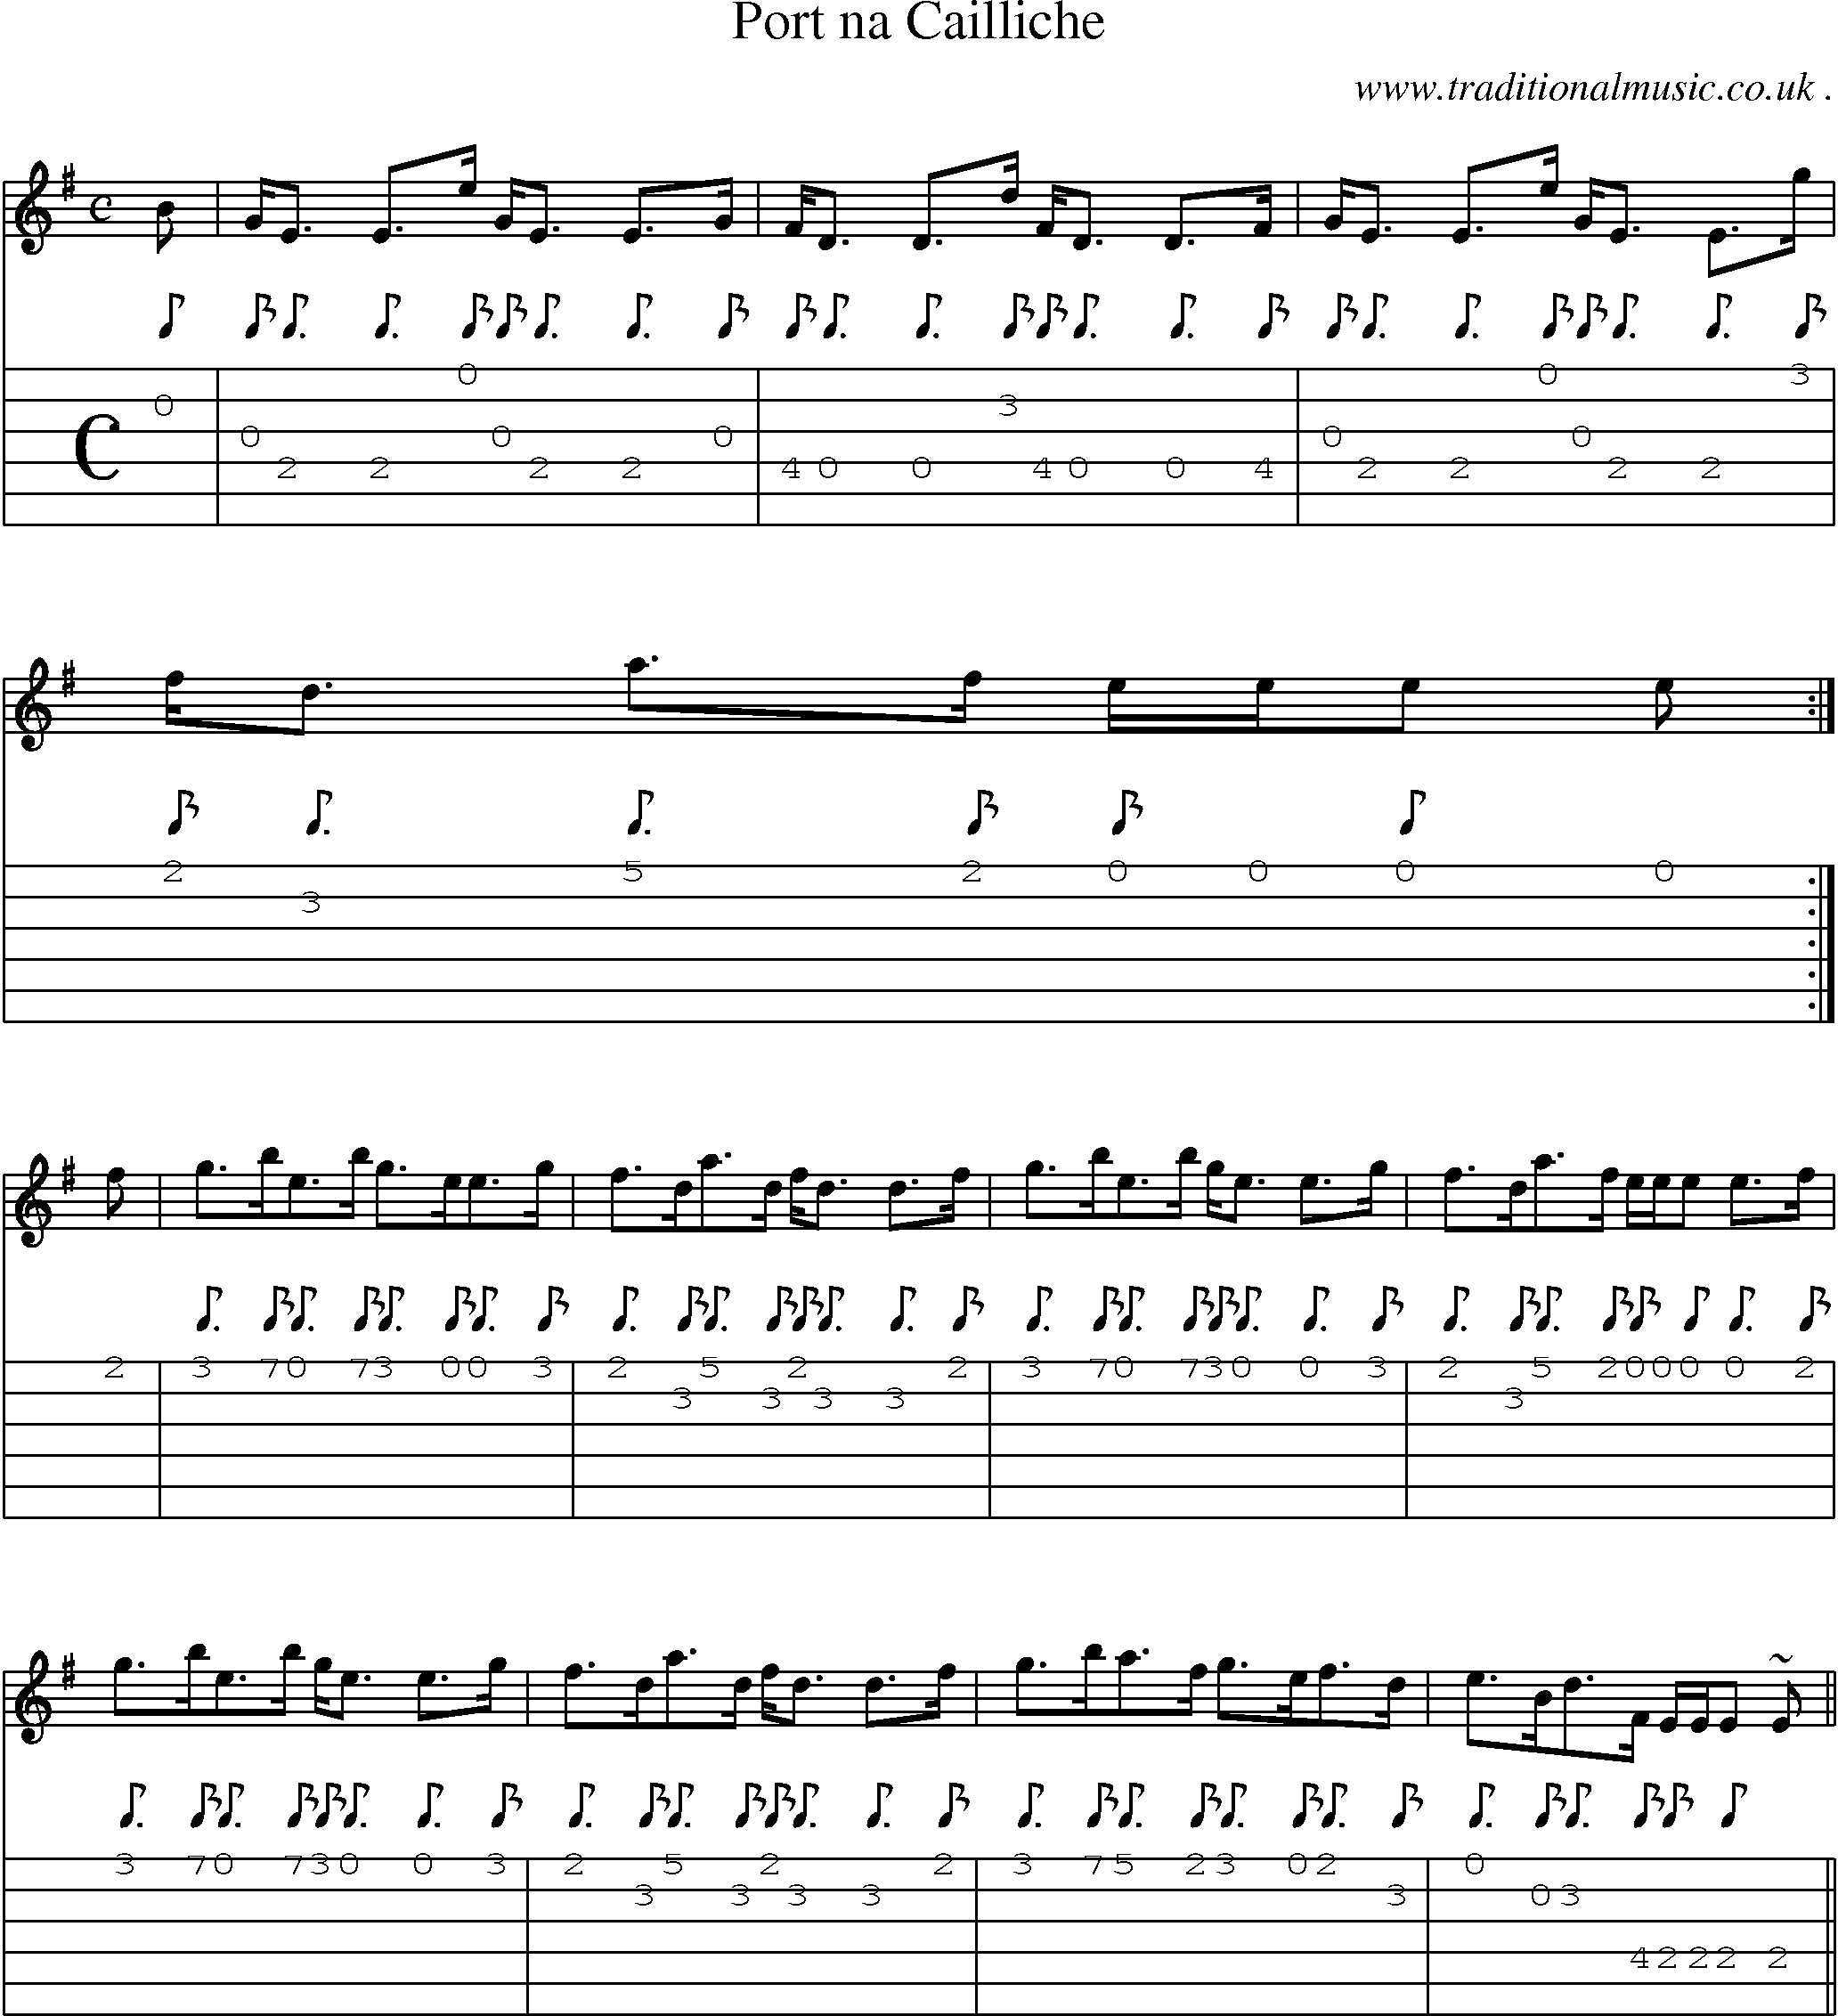 Sheet-music  score, Chords and Guitar Tabs for Port Na Cailliche